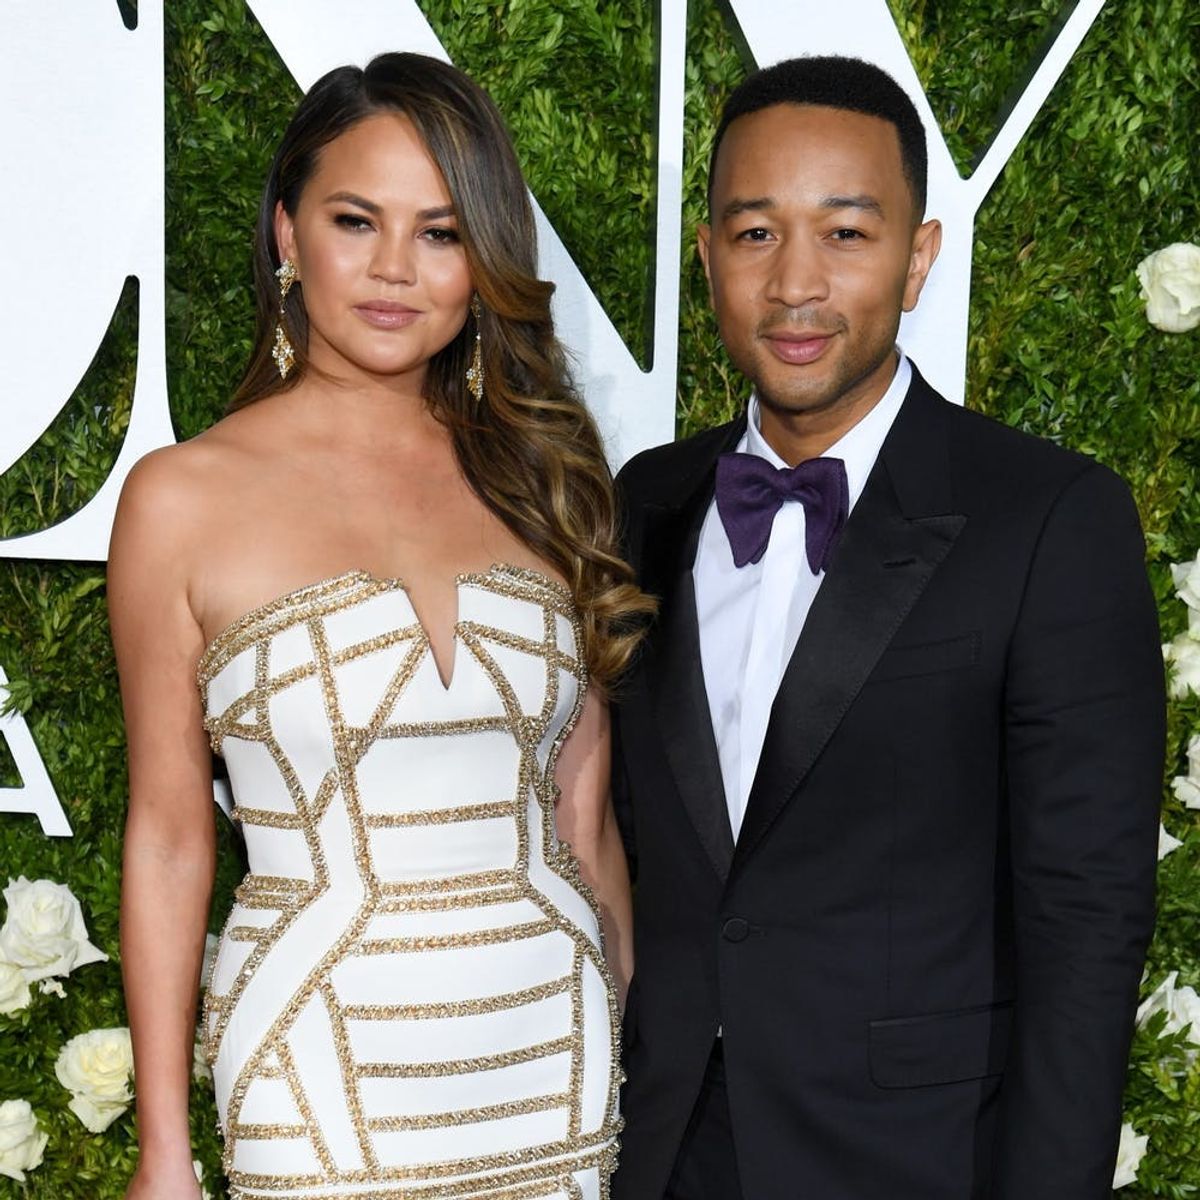 Chrissy Teigen Reveals She and John Legend Will Try for Baby No. 2 Soon!